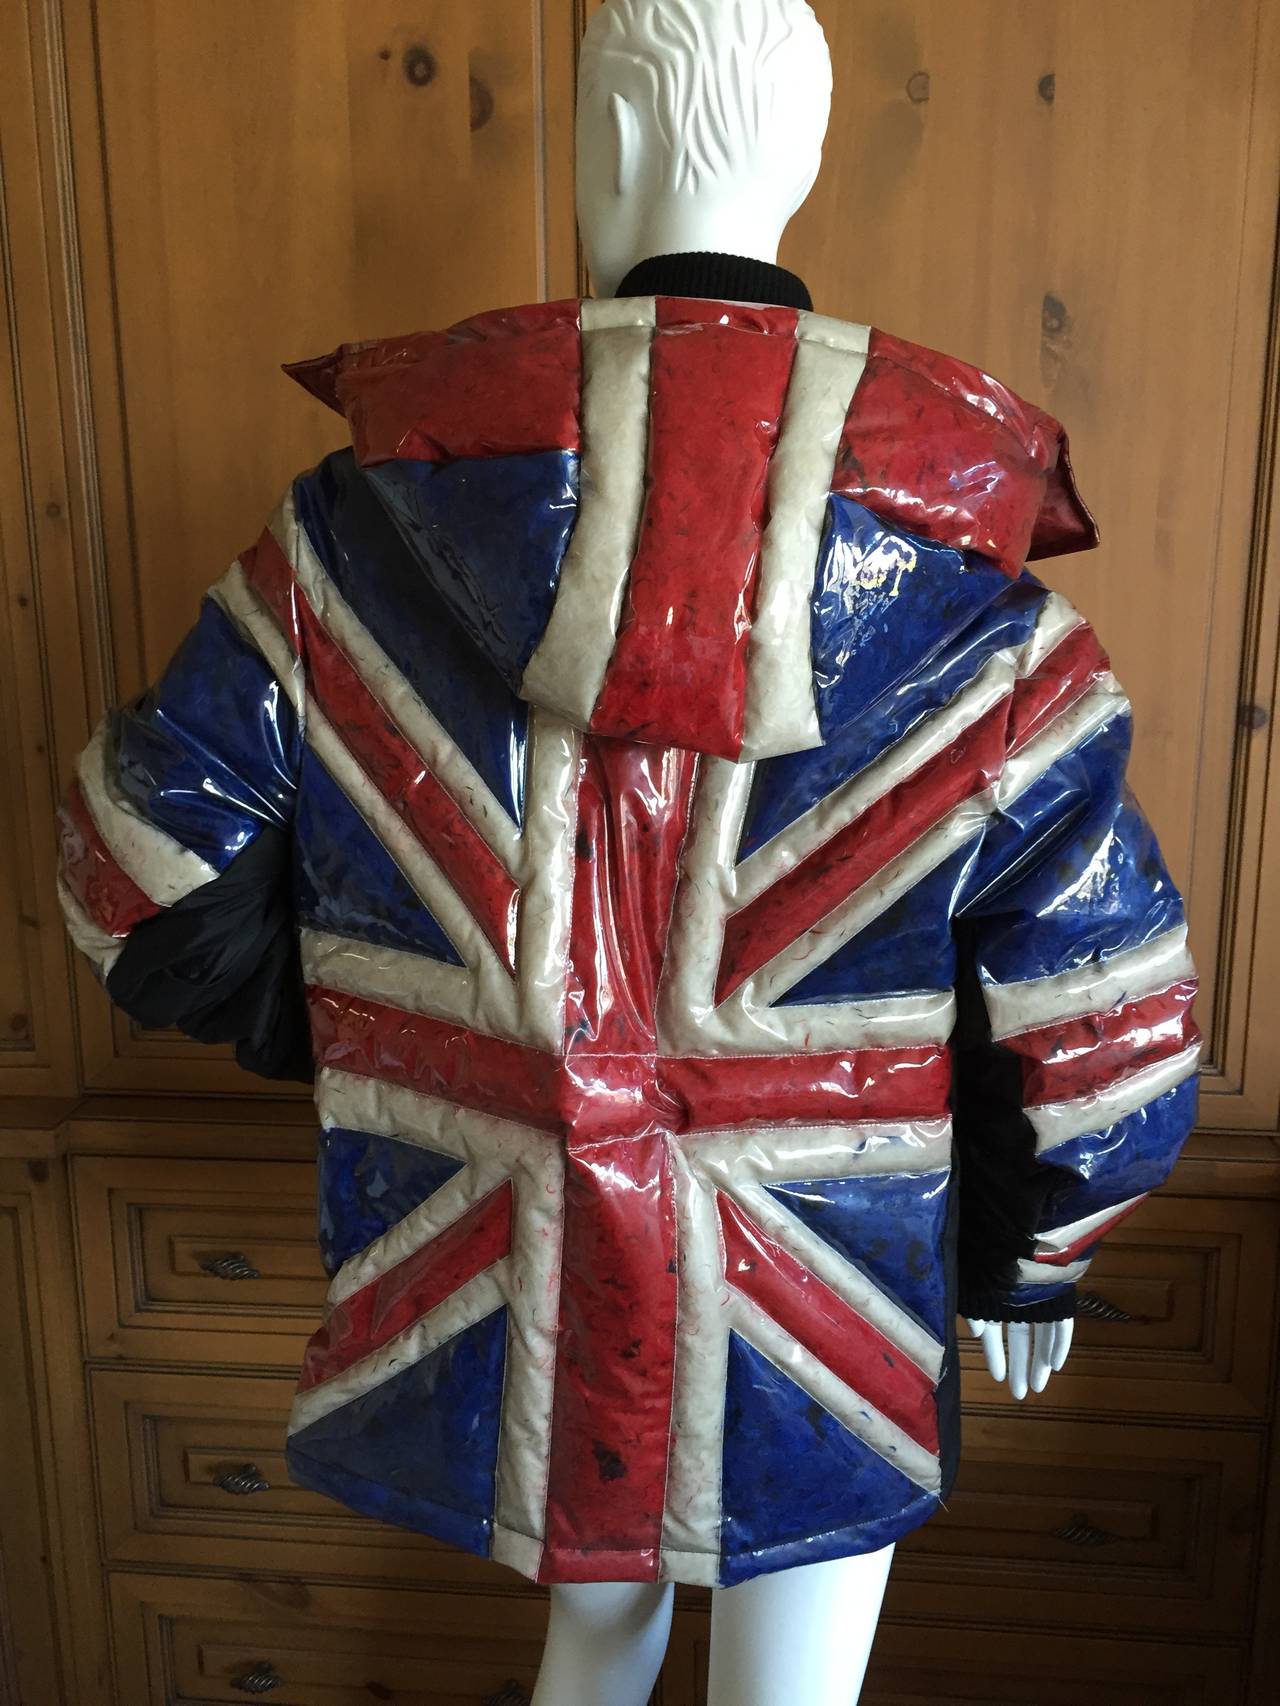 Jean Paul Gaultier Punk Union Jack Puffer Coat 
UNISEX
The Union Jack and zippers paid homage to British Punk, Rosbifs in Space